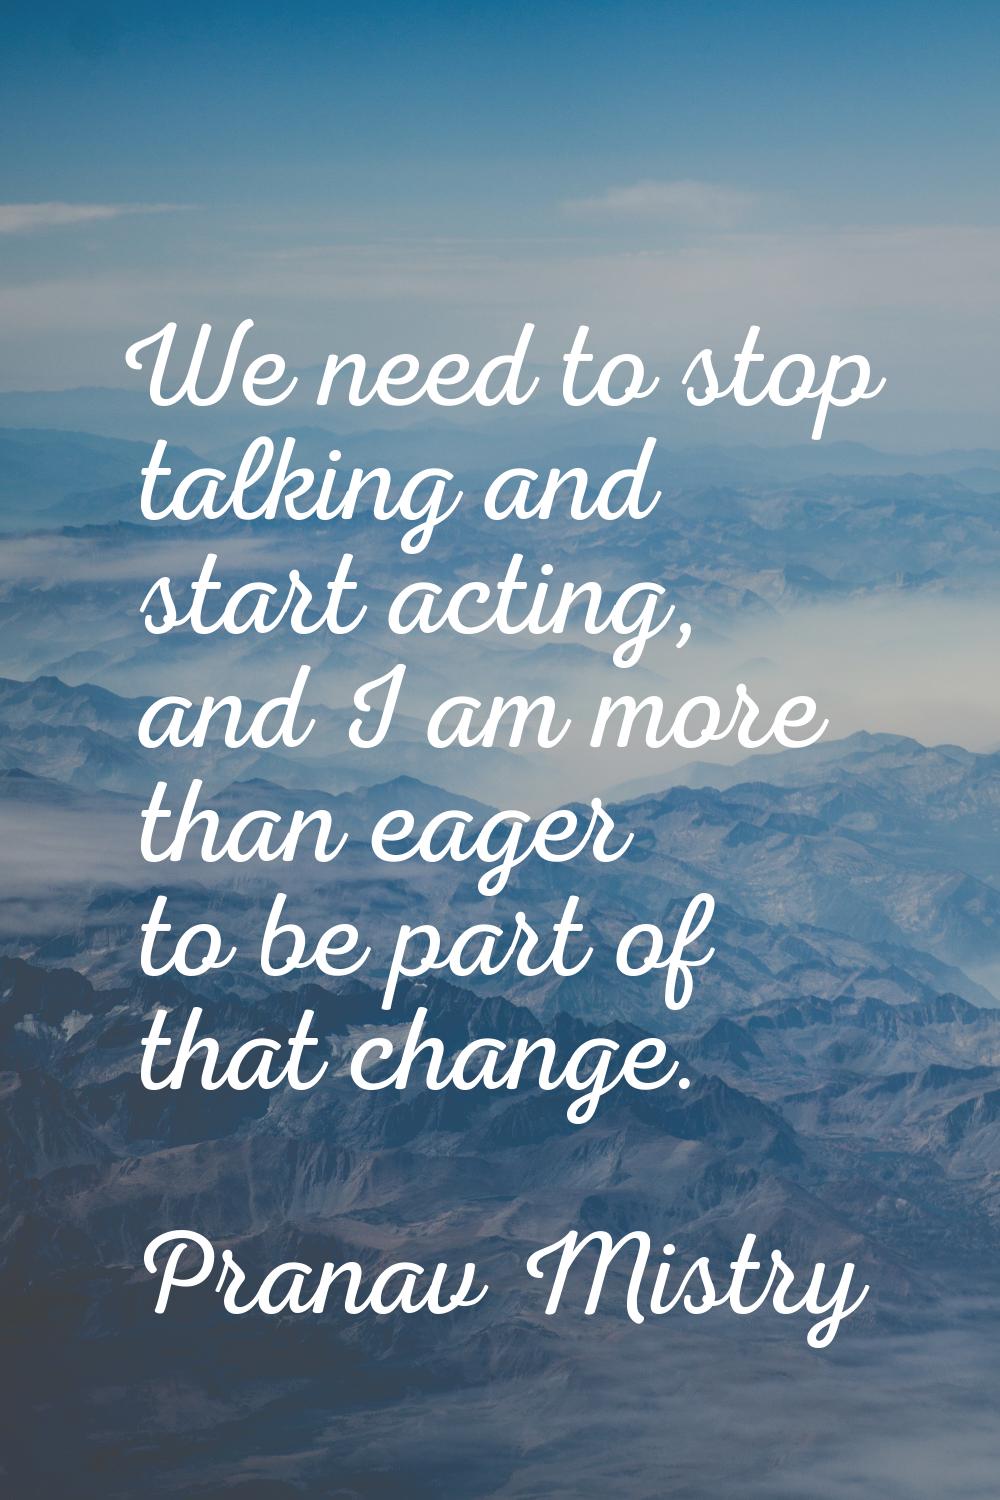 We need to stop talking and start acting, and I am more than eager to be part of that change.